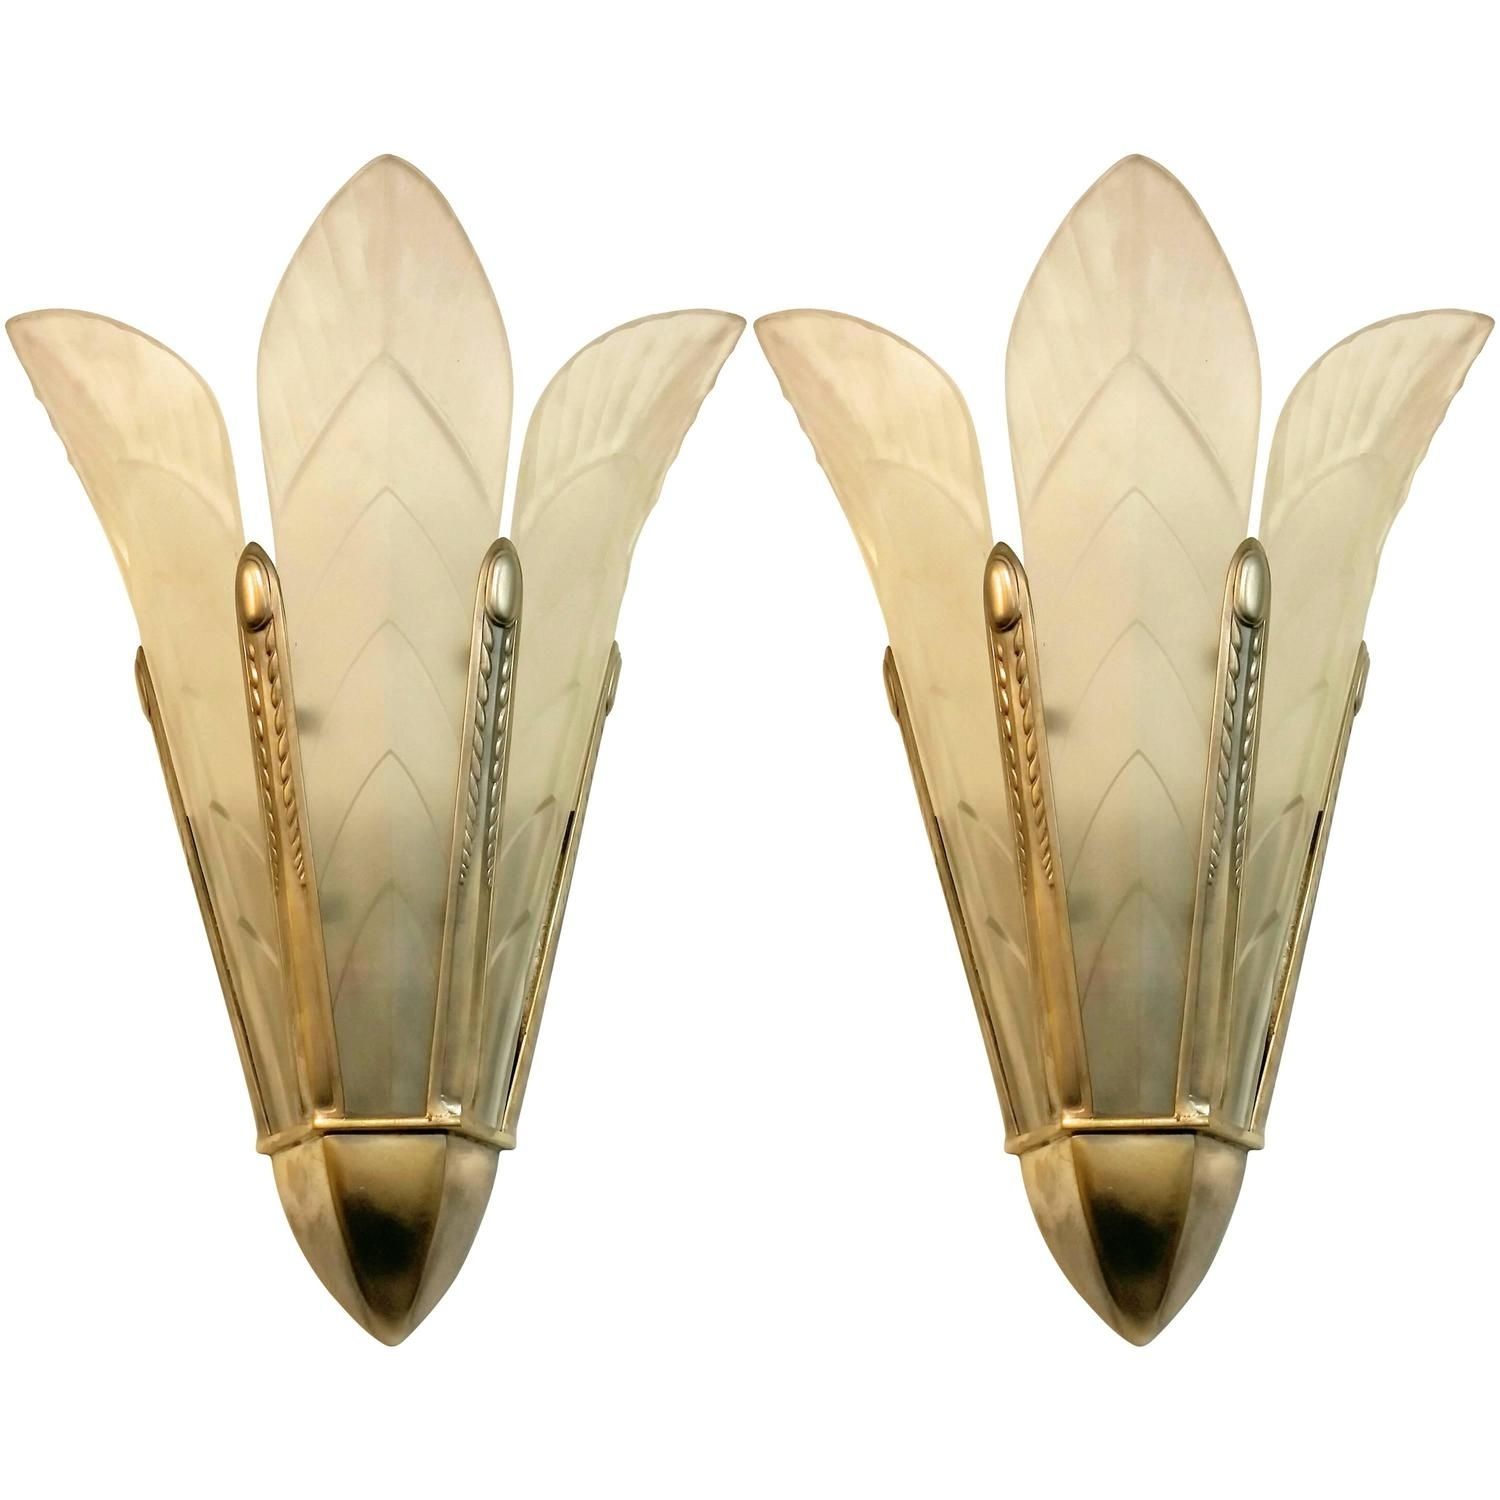 French Art Deco Wall Sconcessabino For Sale At 1stdibs In Art Deco Wall Sconces (View 5 of 20)